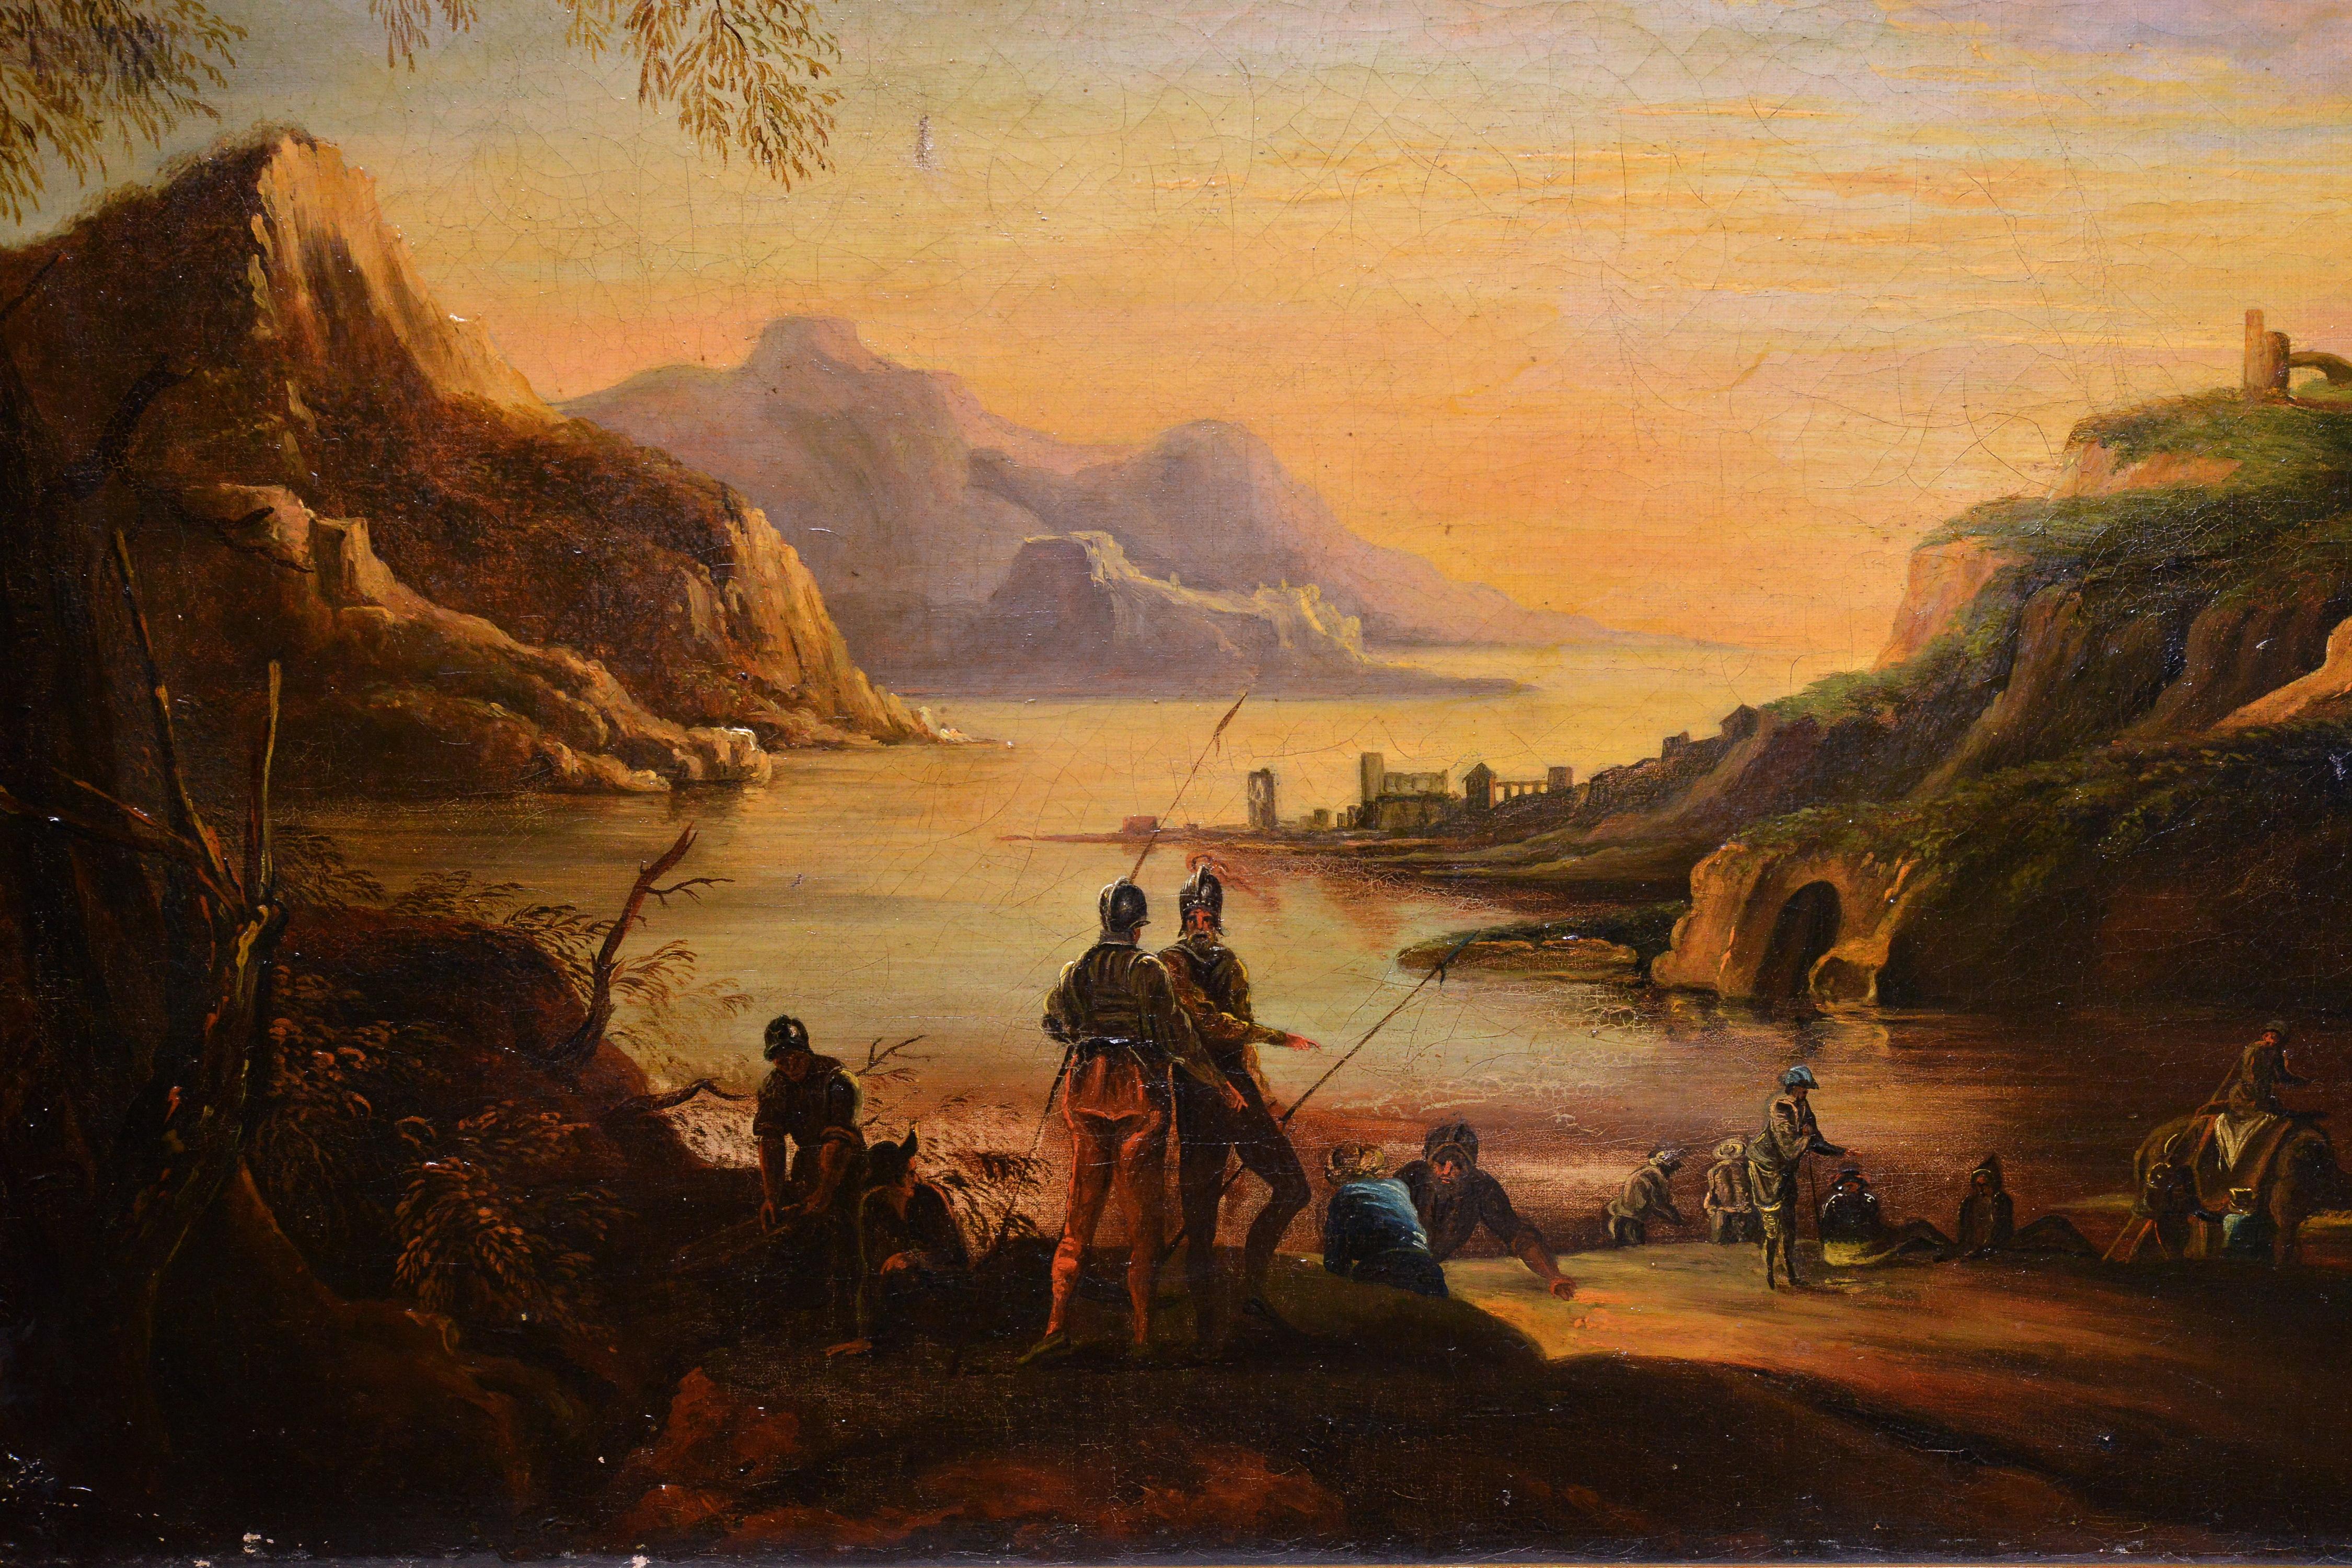 Capriccio Panoramic landscape Sea Bay at sunset 18th century Large oil painting - Painting by Unknown